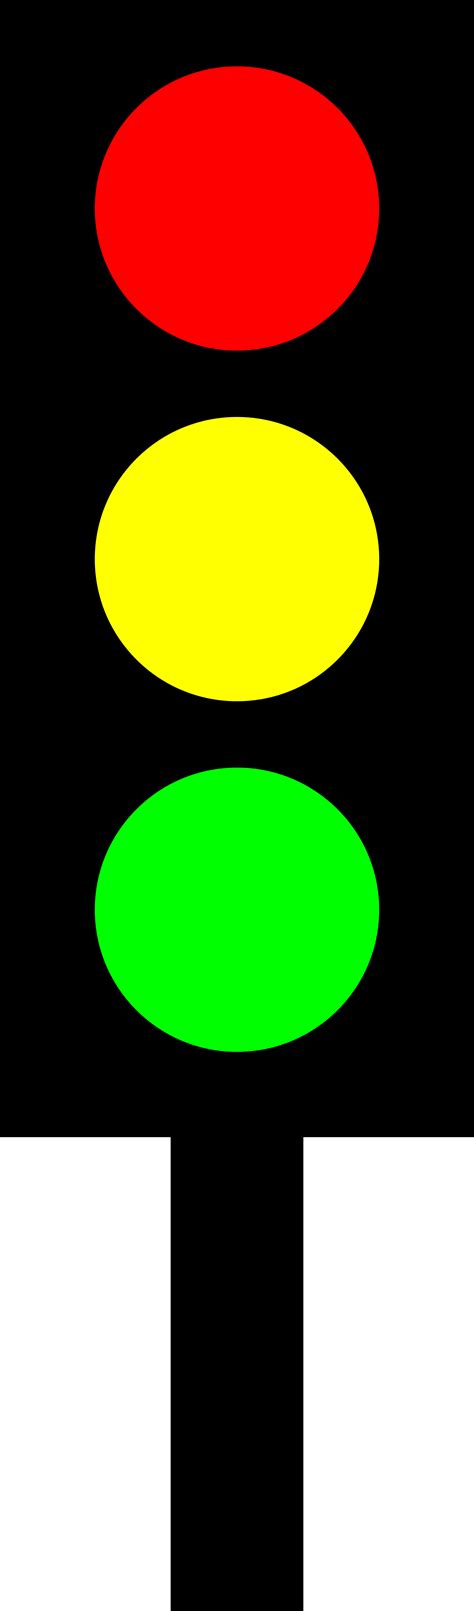 Traffic Lights Sign Logo Download Logo Icon Png Svg Images And Photos